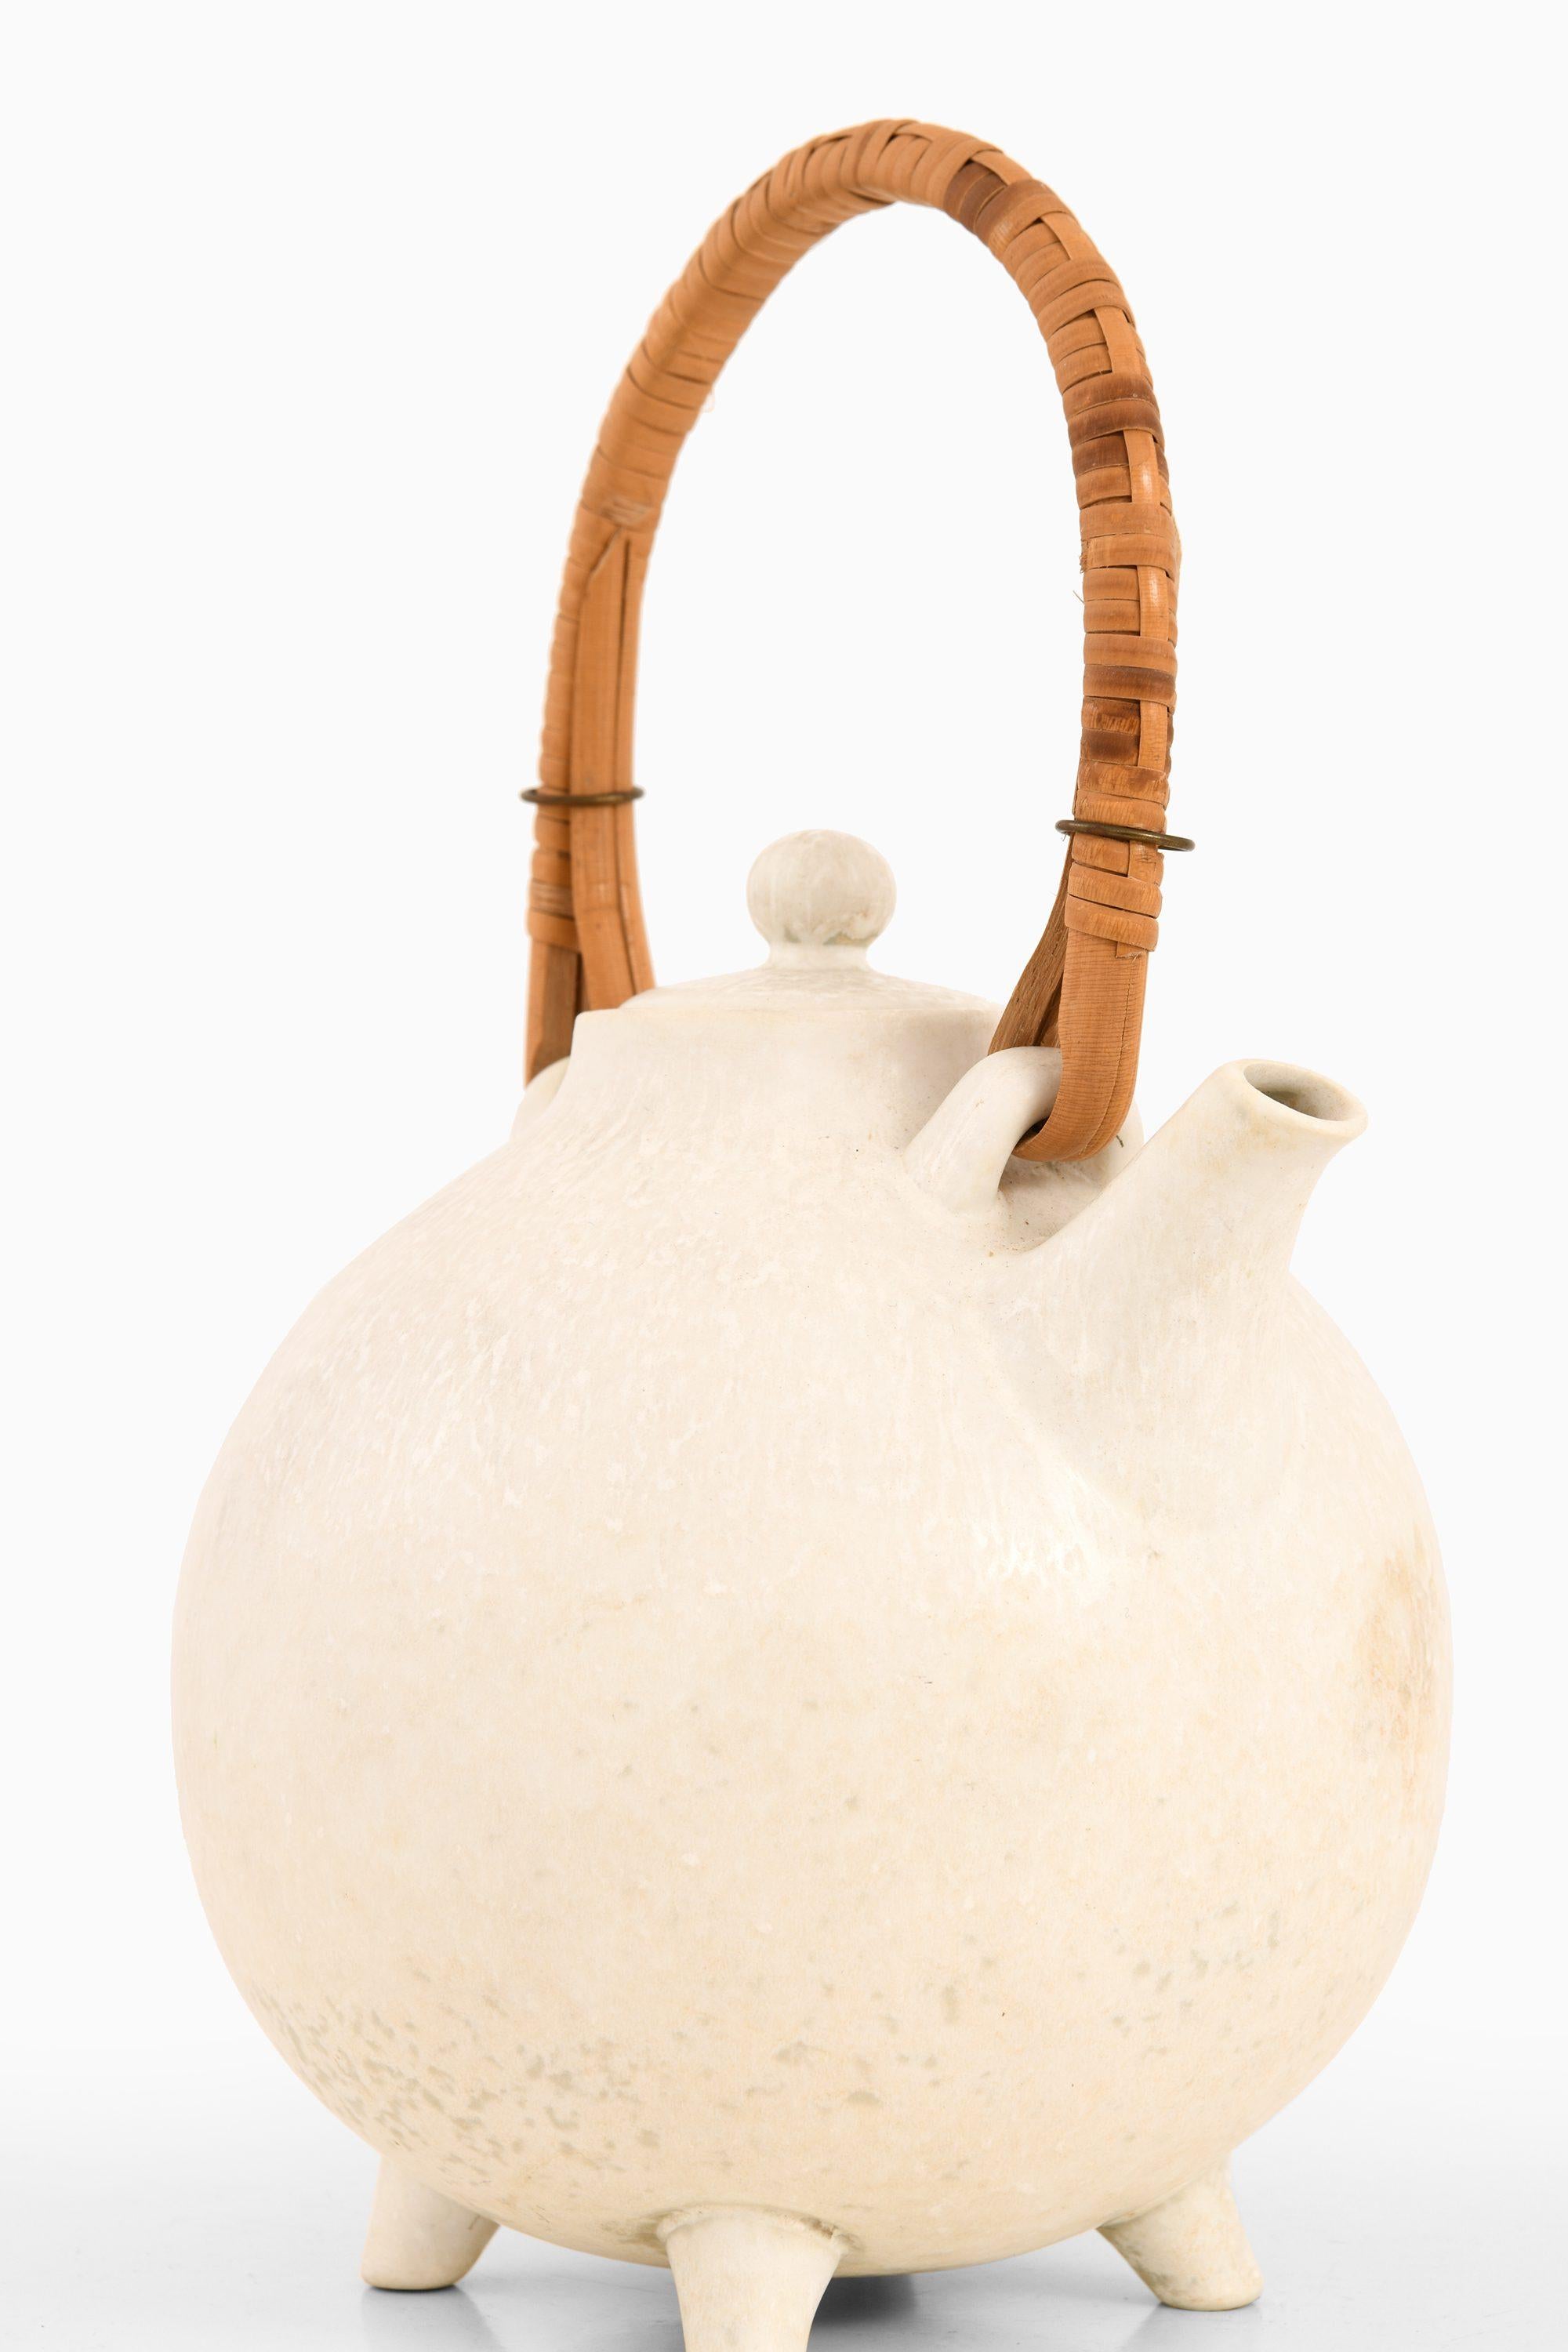 Teapot in Stoneware and Cane by Gunnar Nylund, 1960’s

Additional Information:
Material: Stoneware, cane
Style: Mid century, Scandinavian
Produced by Rörstrand in Sweden
Dimensions (W x D x H): 16 x 14 x 24 cm
Condition: Good vintage condition, with